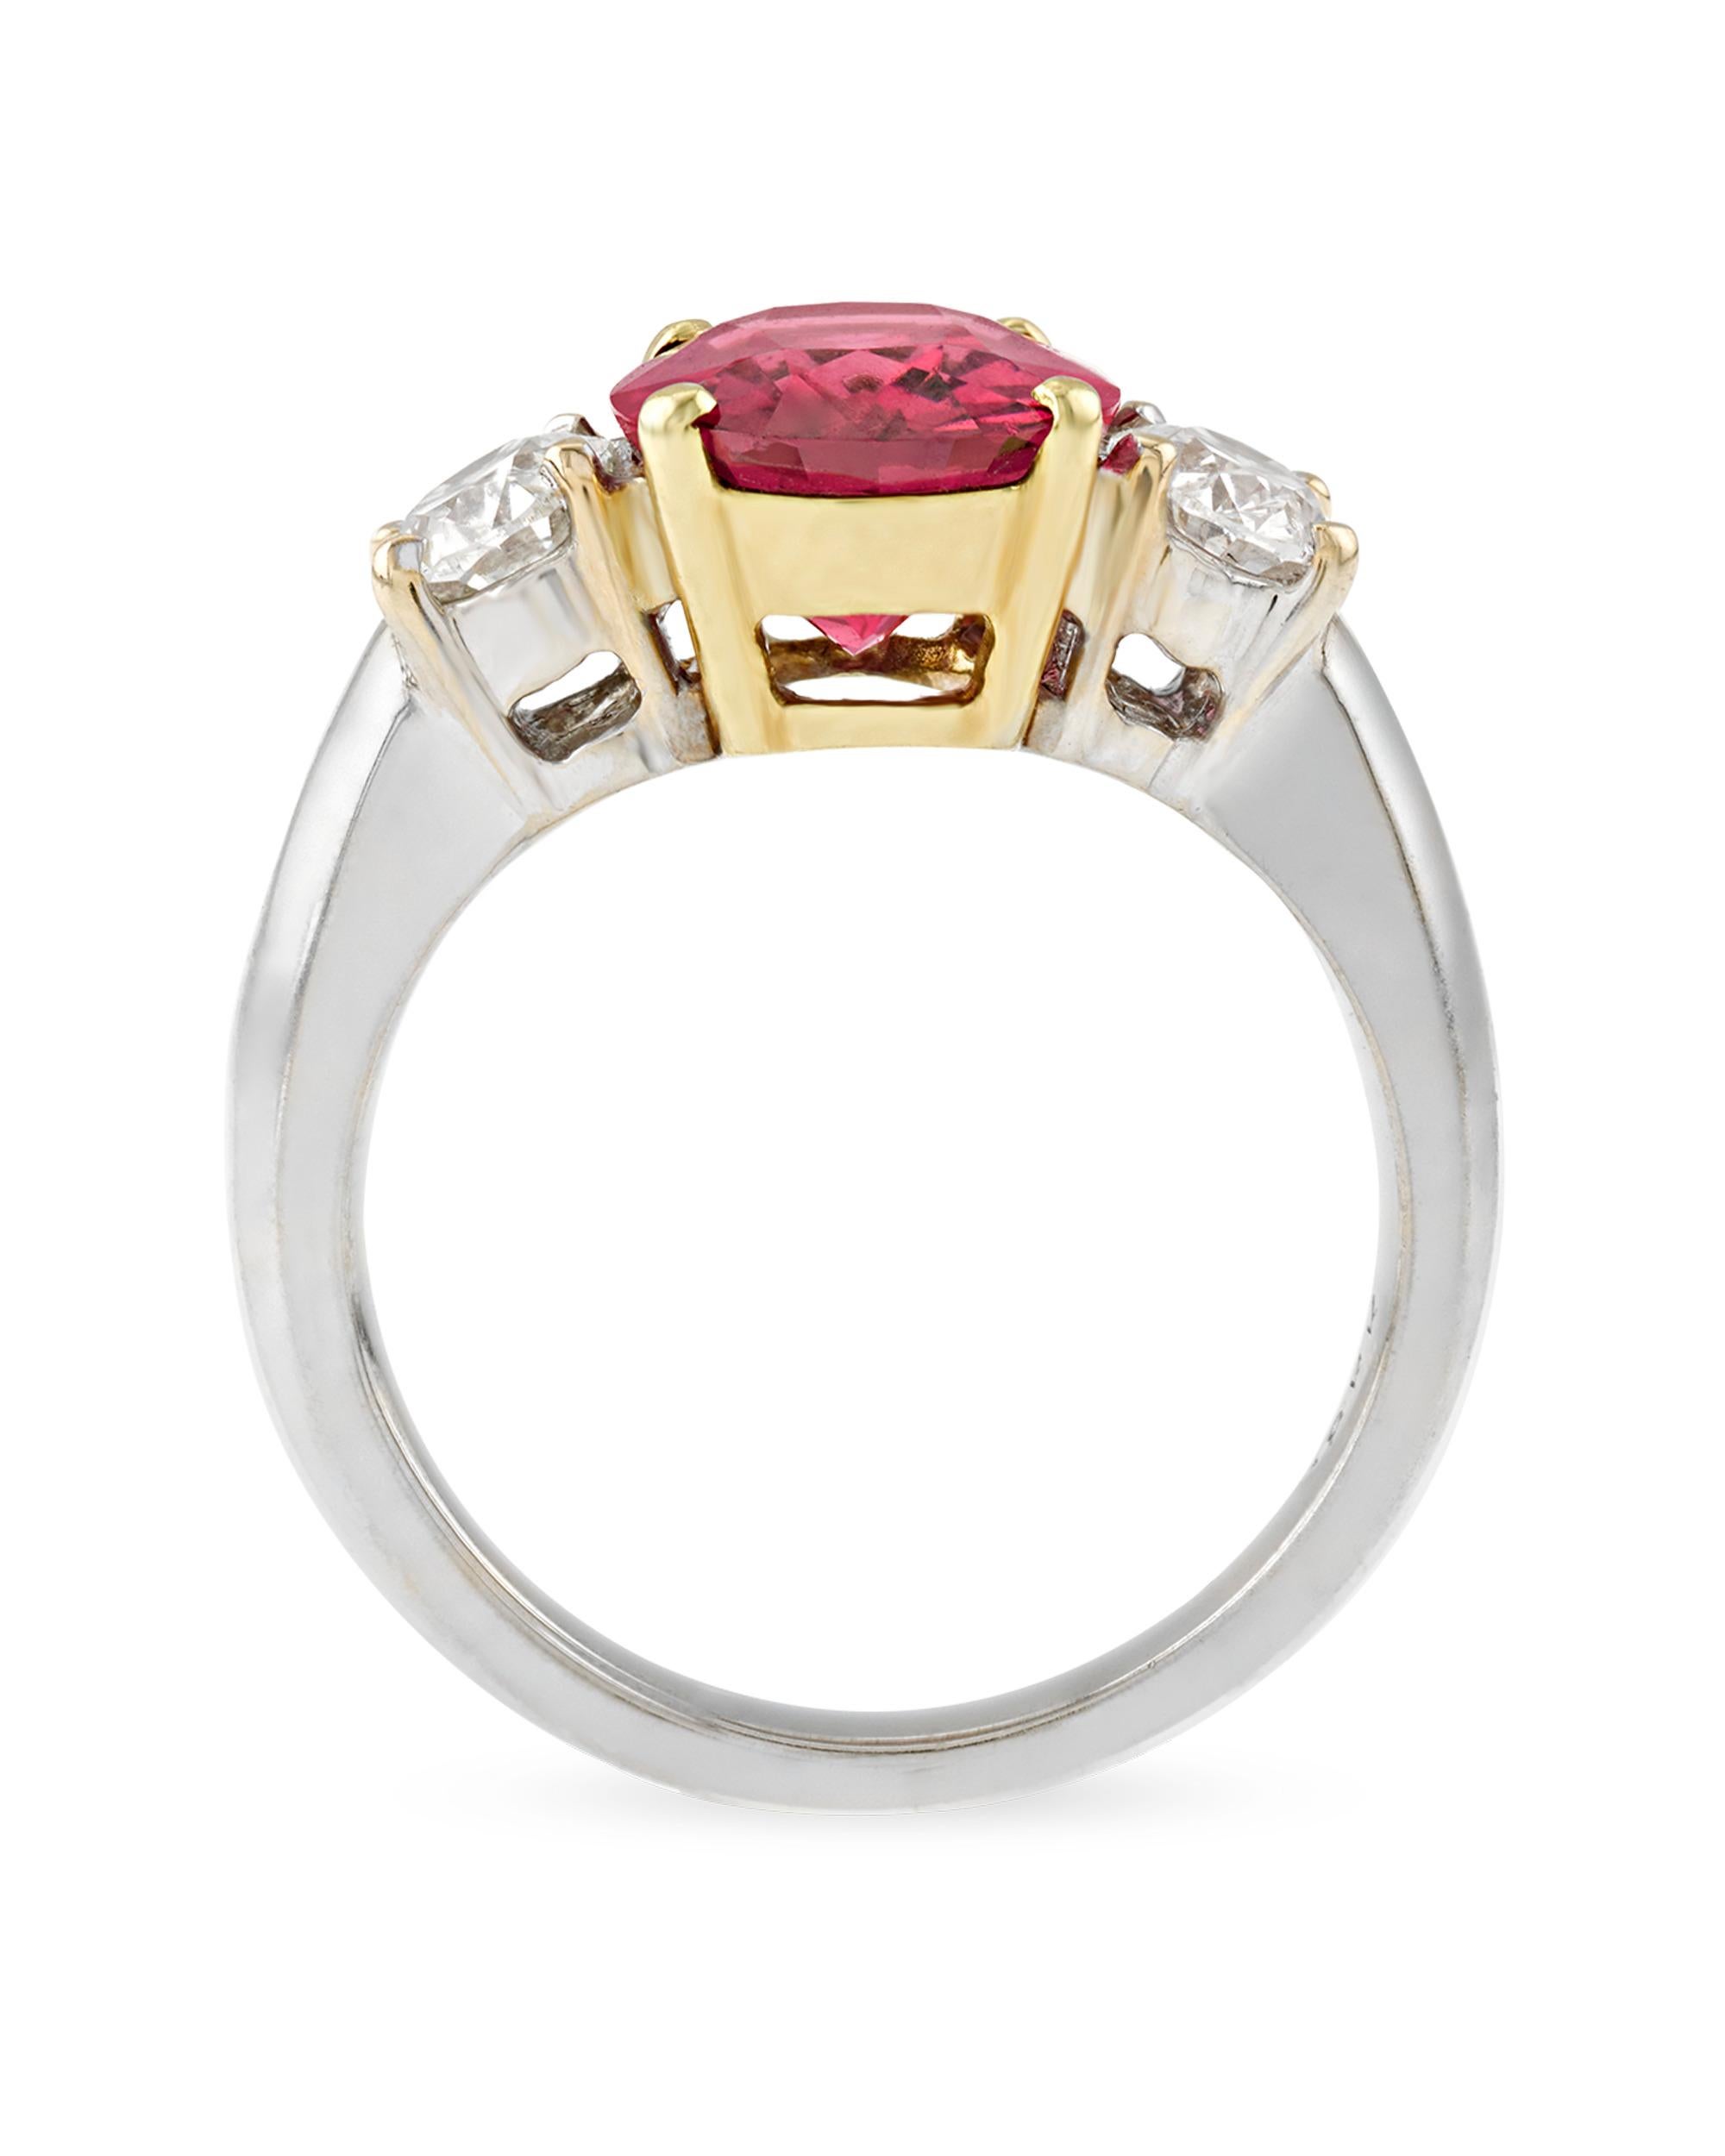 A sparkling red spinel captivates the eye in this ring. Exhibiting a stunning crimson color, this 3.76-carat jewel is set in 18K gold between two white diamonds totaling 1.04 carats. Though often mistaken for rubies or sapphires, spinels have